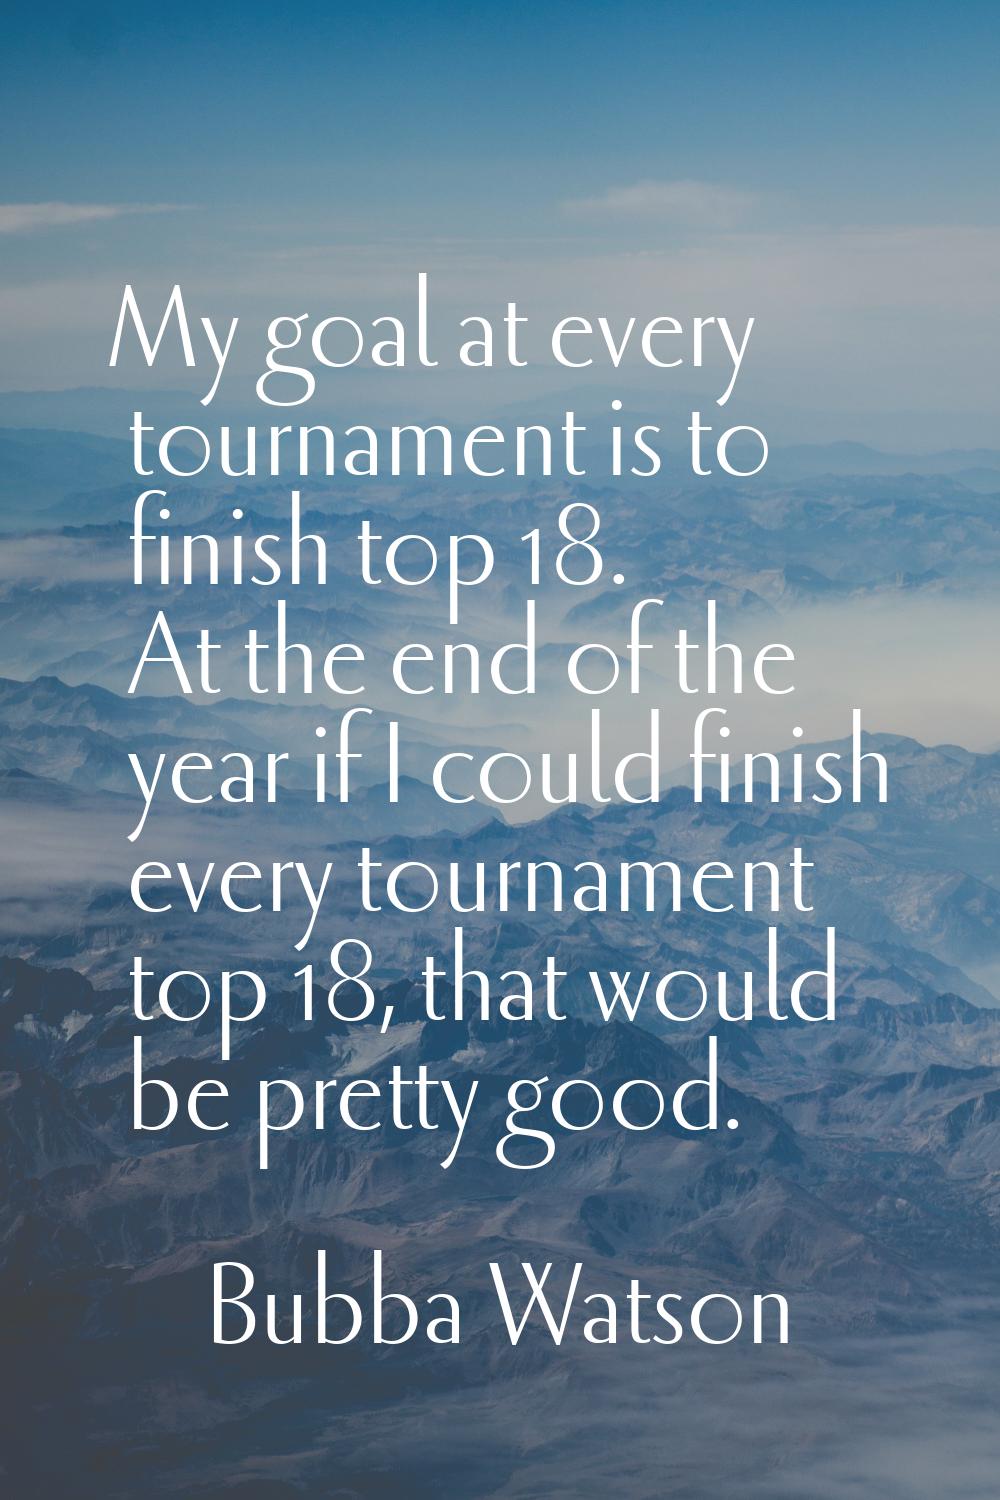 My goal at every tournament is to finish top 18. At the end of the year if I could finish every tou